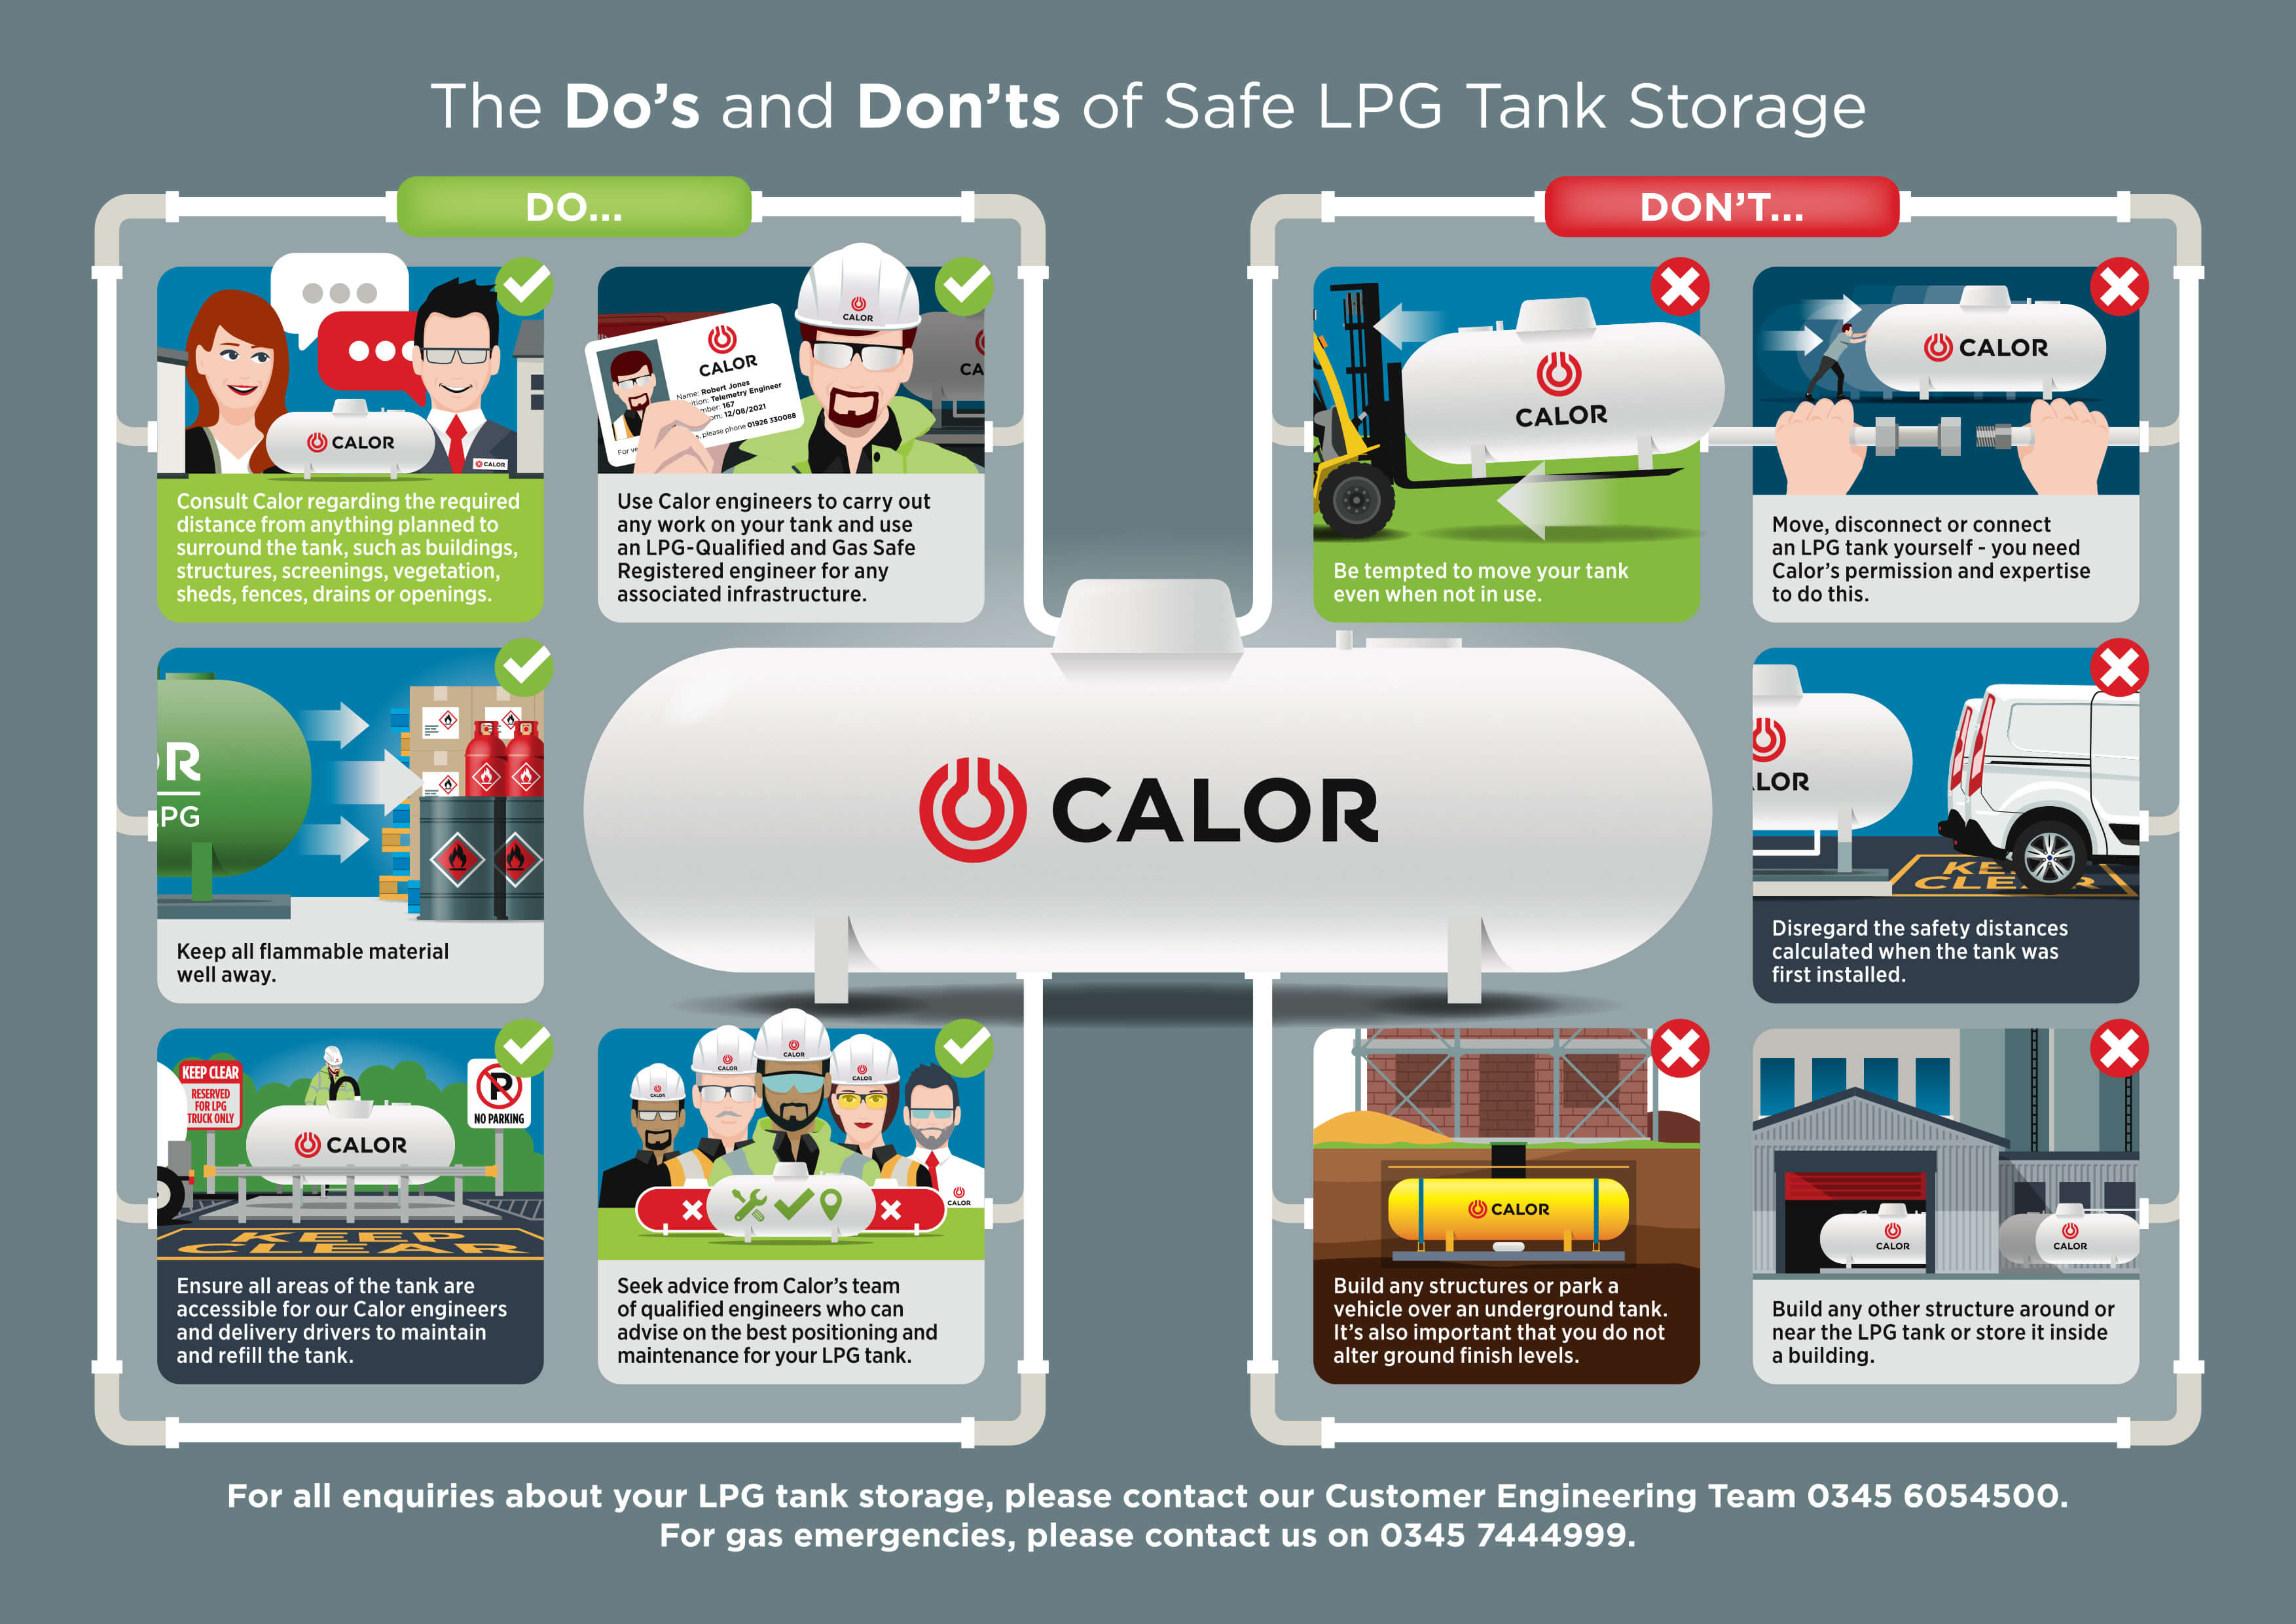 Calor Gas infographic on the do's and don'ts of safe LPG tank storage